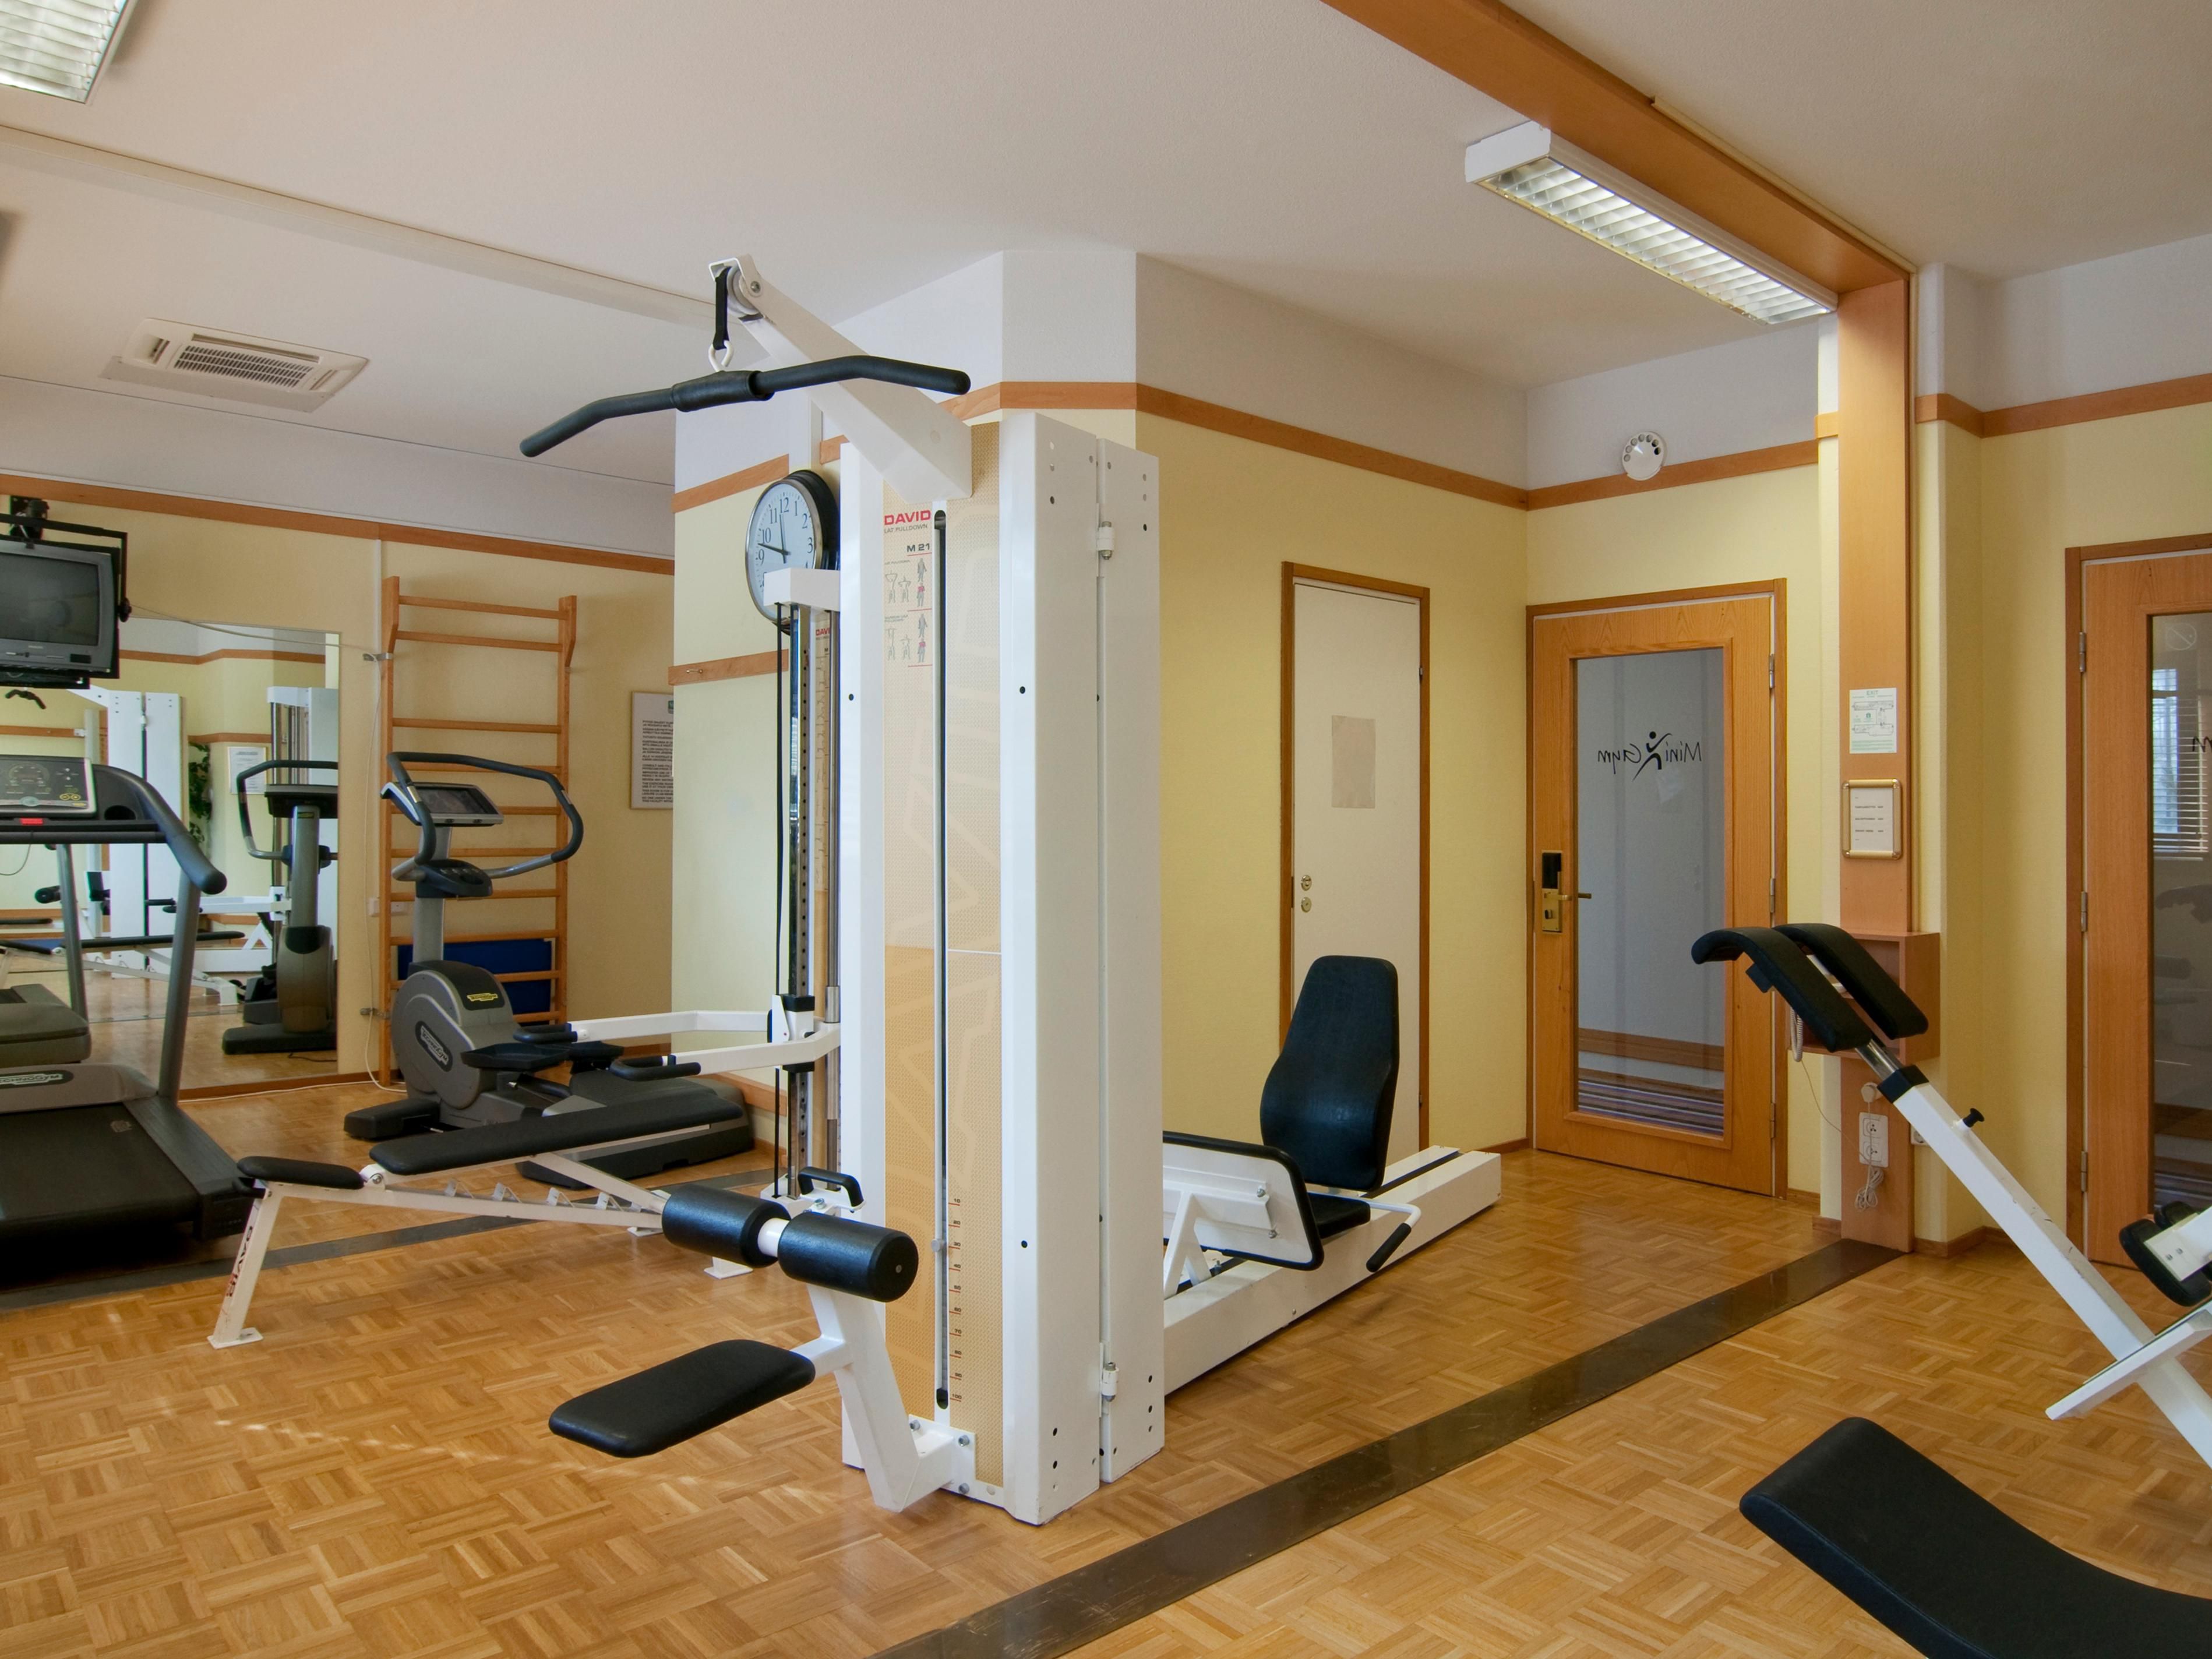 Holiday Inn Helsinki-Vantaa Airport offers free use of the gym and hotel saunas. The versatile range of equipment enables comprehensive fitness training. Our gym has all the modern equipment needed for you to get fit again. Towels and drinking water are also provided free of charge. Contact our hotel for more information.